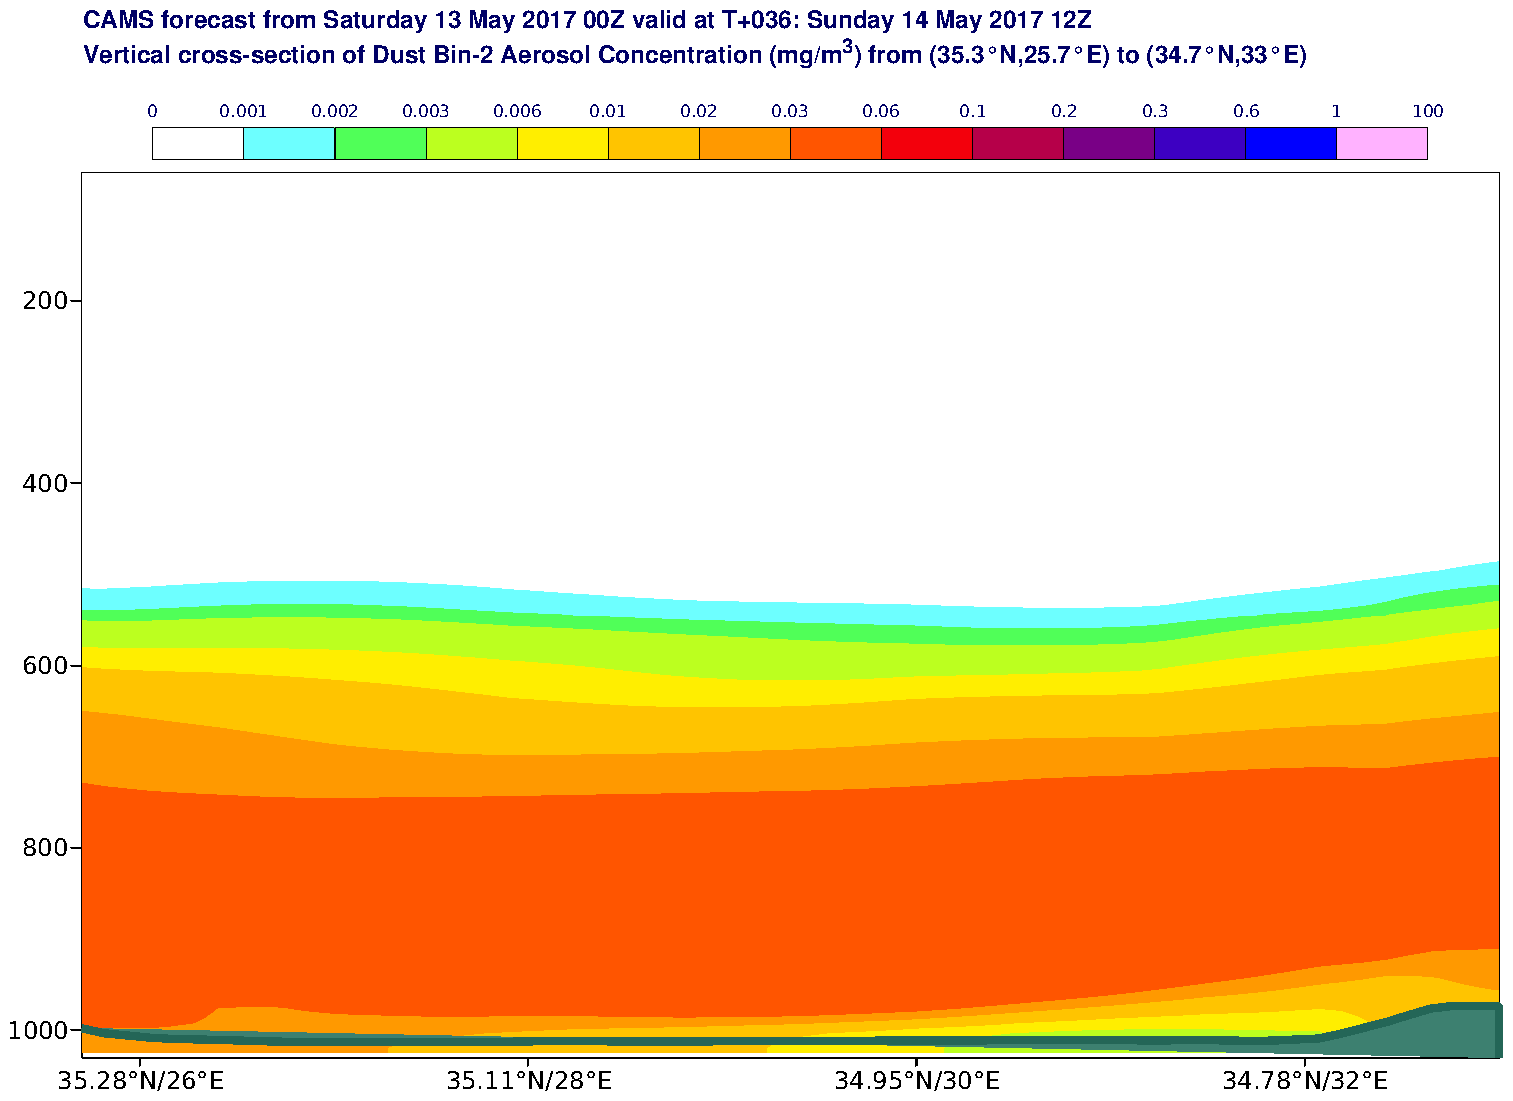 Vertical cross-section of Dust Bin-2 Aerosol Concentration (mg/m3) valid at T36 - 2017-05-14 12:00